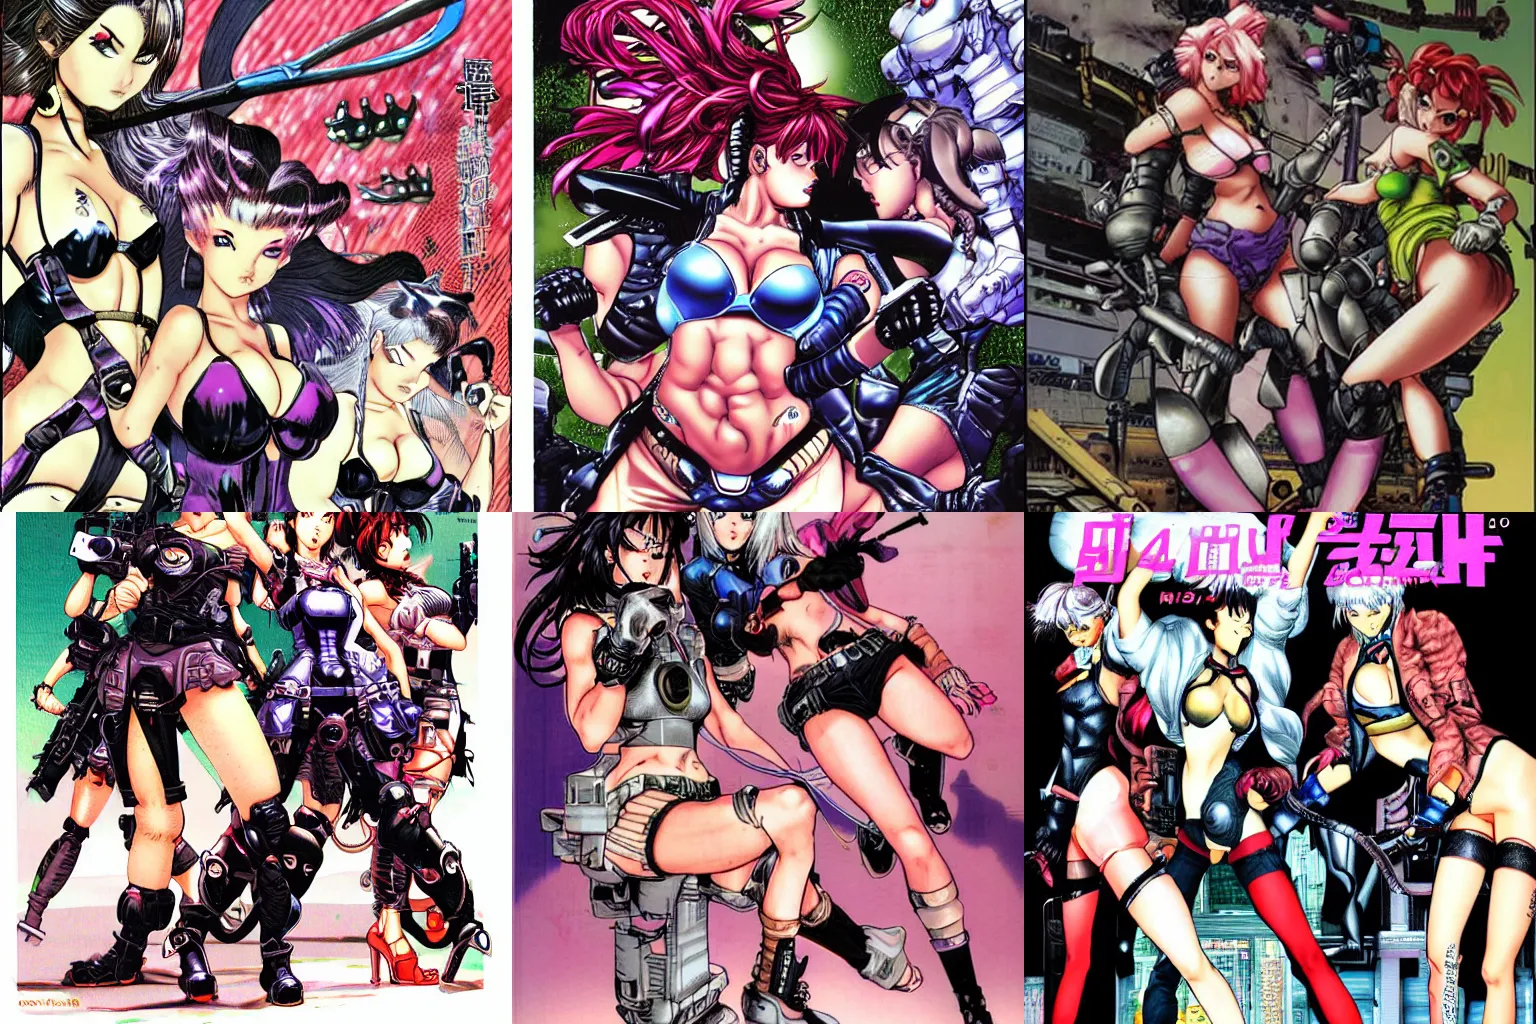 Prompt: fight girls by masamune shirow